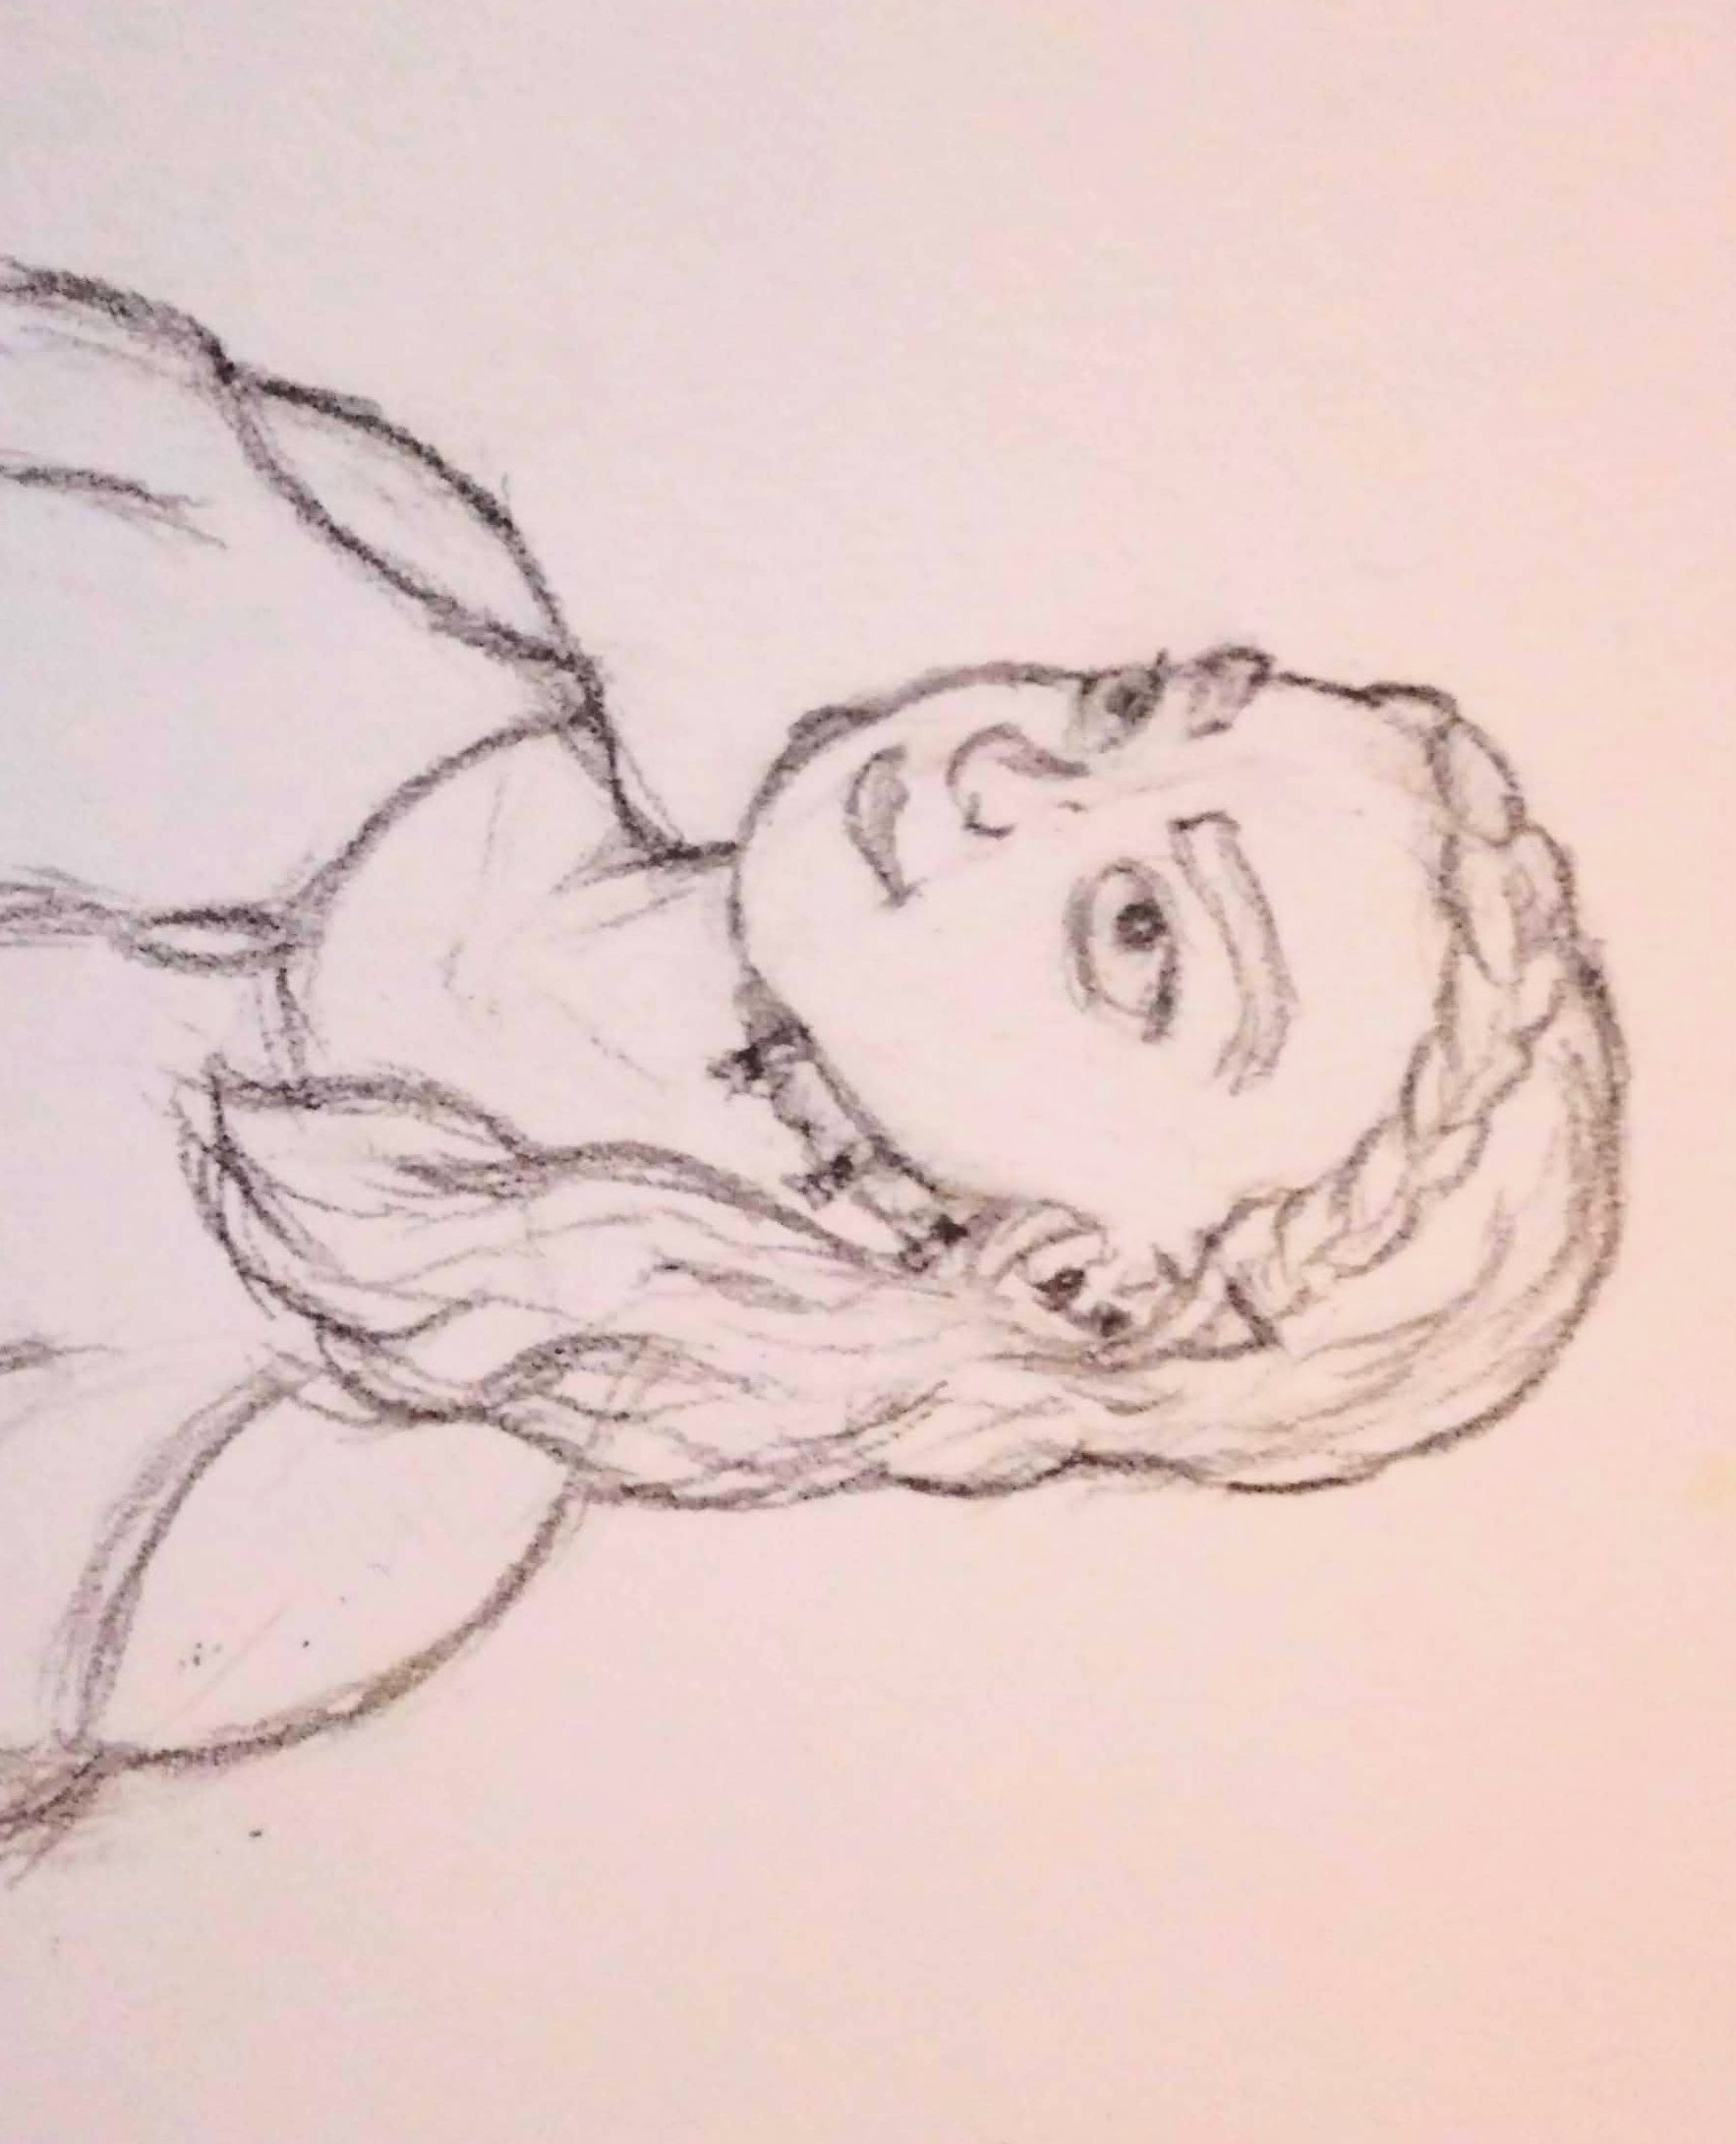 a sketch of a green woman with short tusks and mutton chops